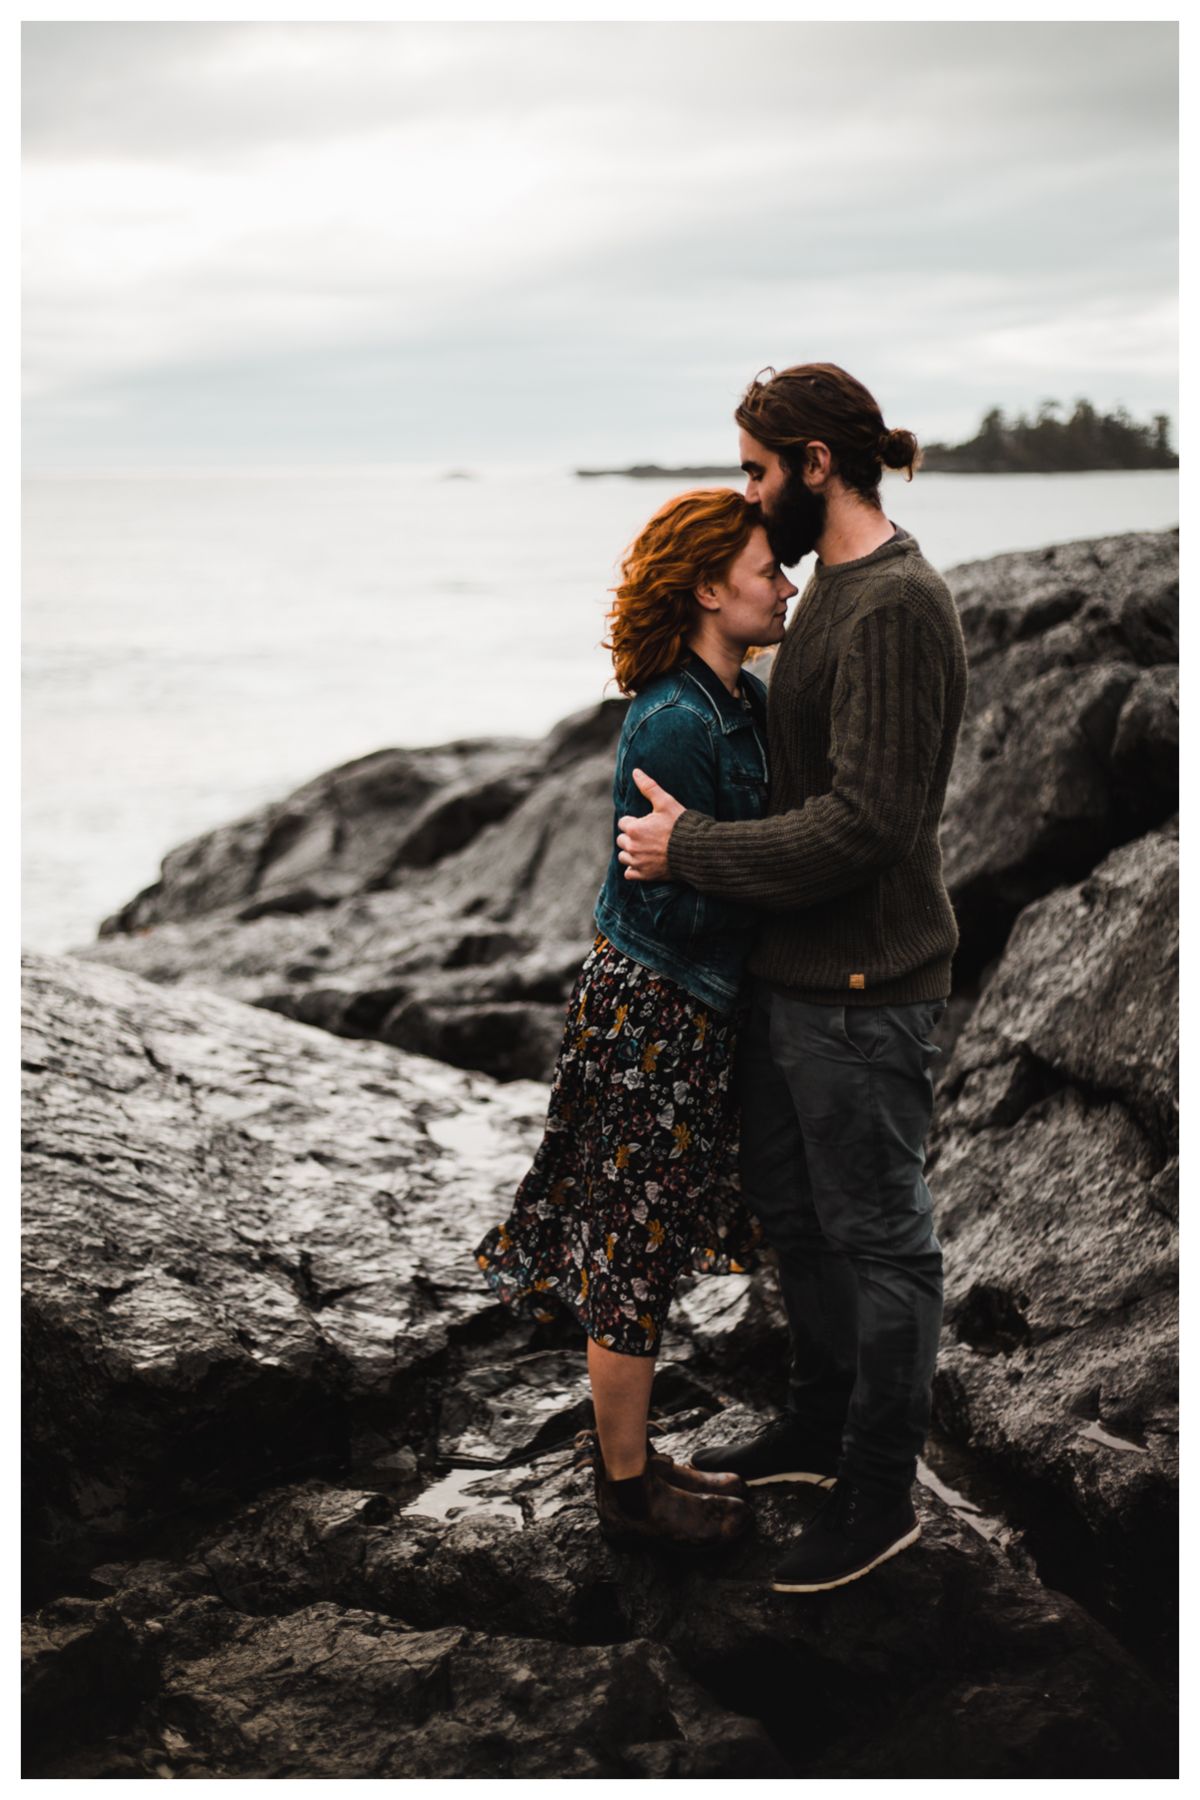 Tofino wedding photographer for a destination engagement photography session on Vancouver Island, BC - Image 29